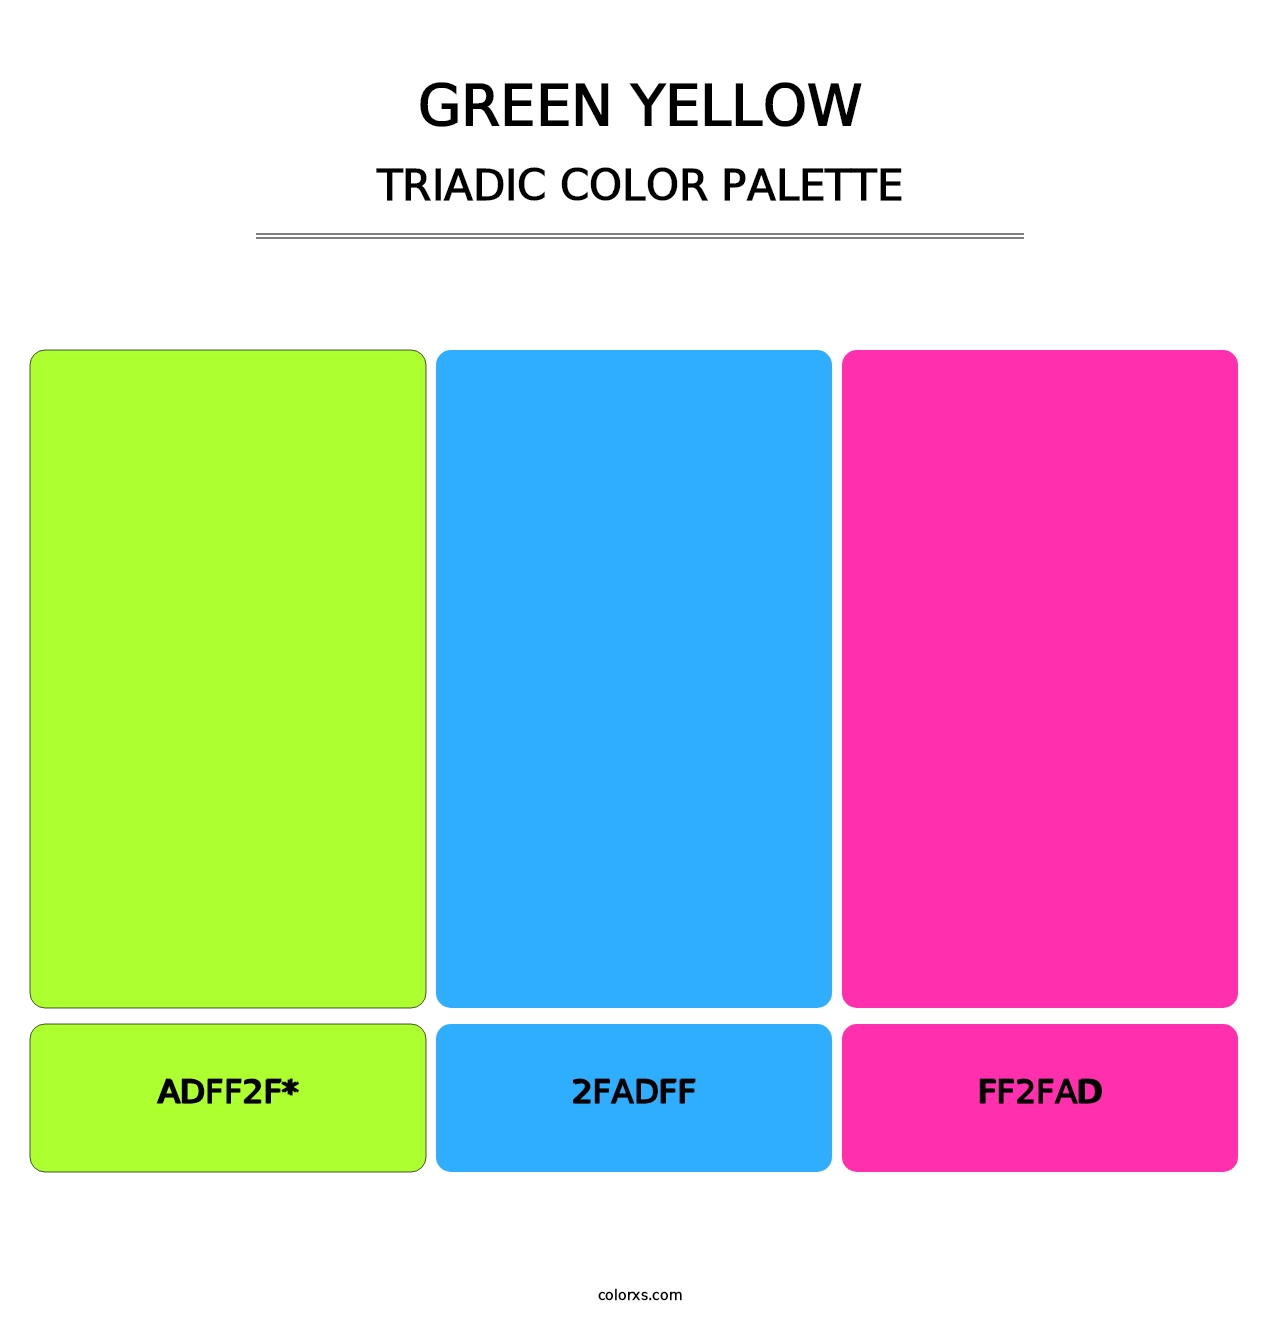 Green Yellow - Triadic Color Palette